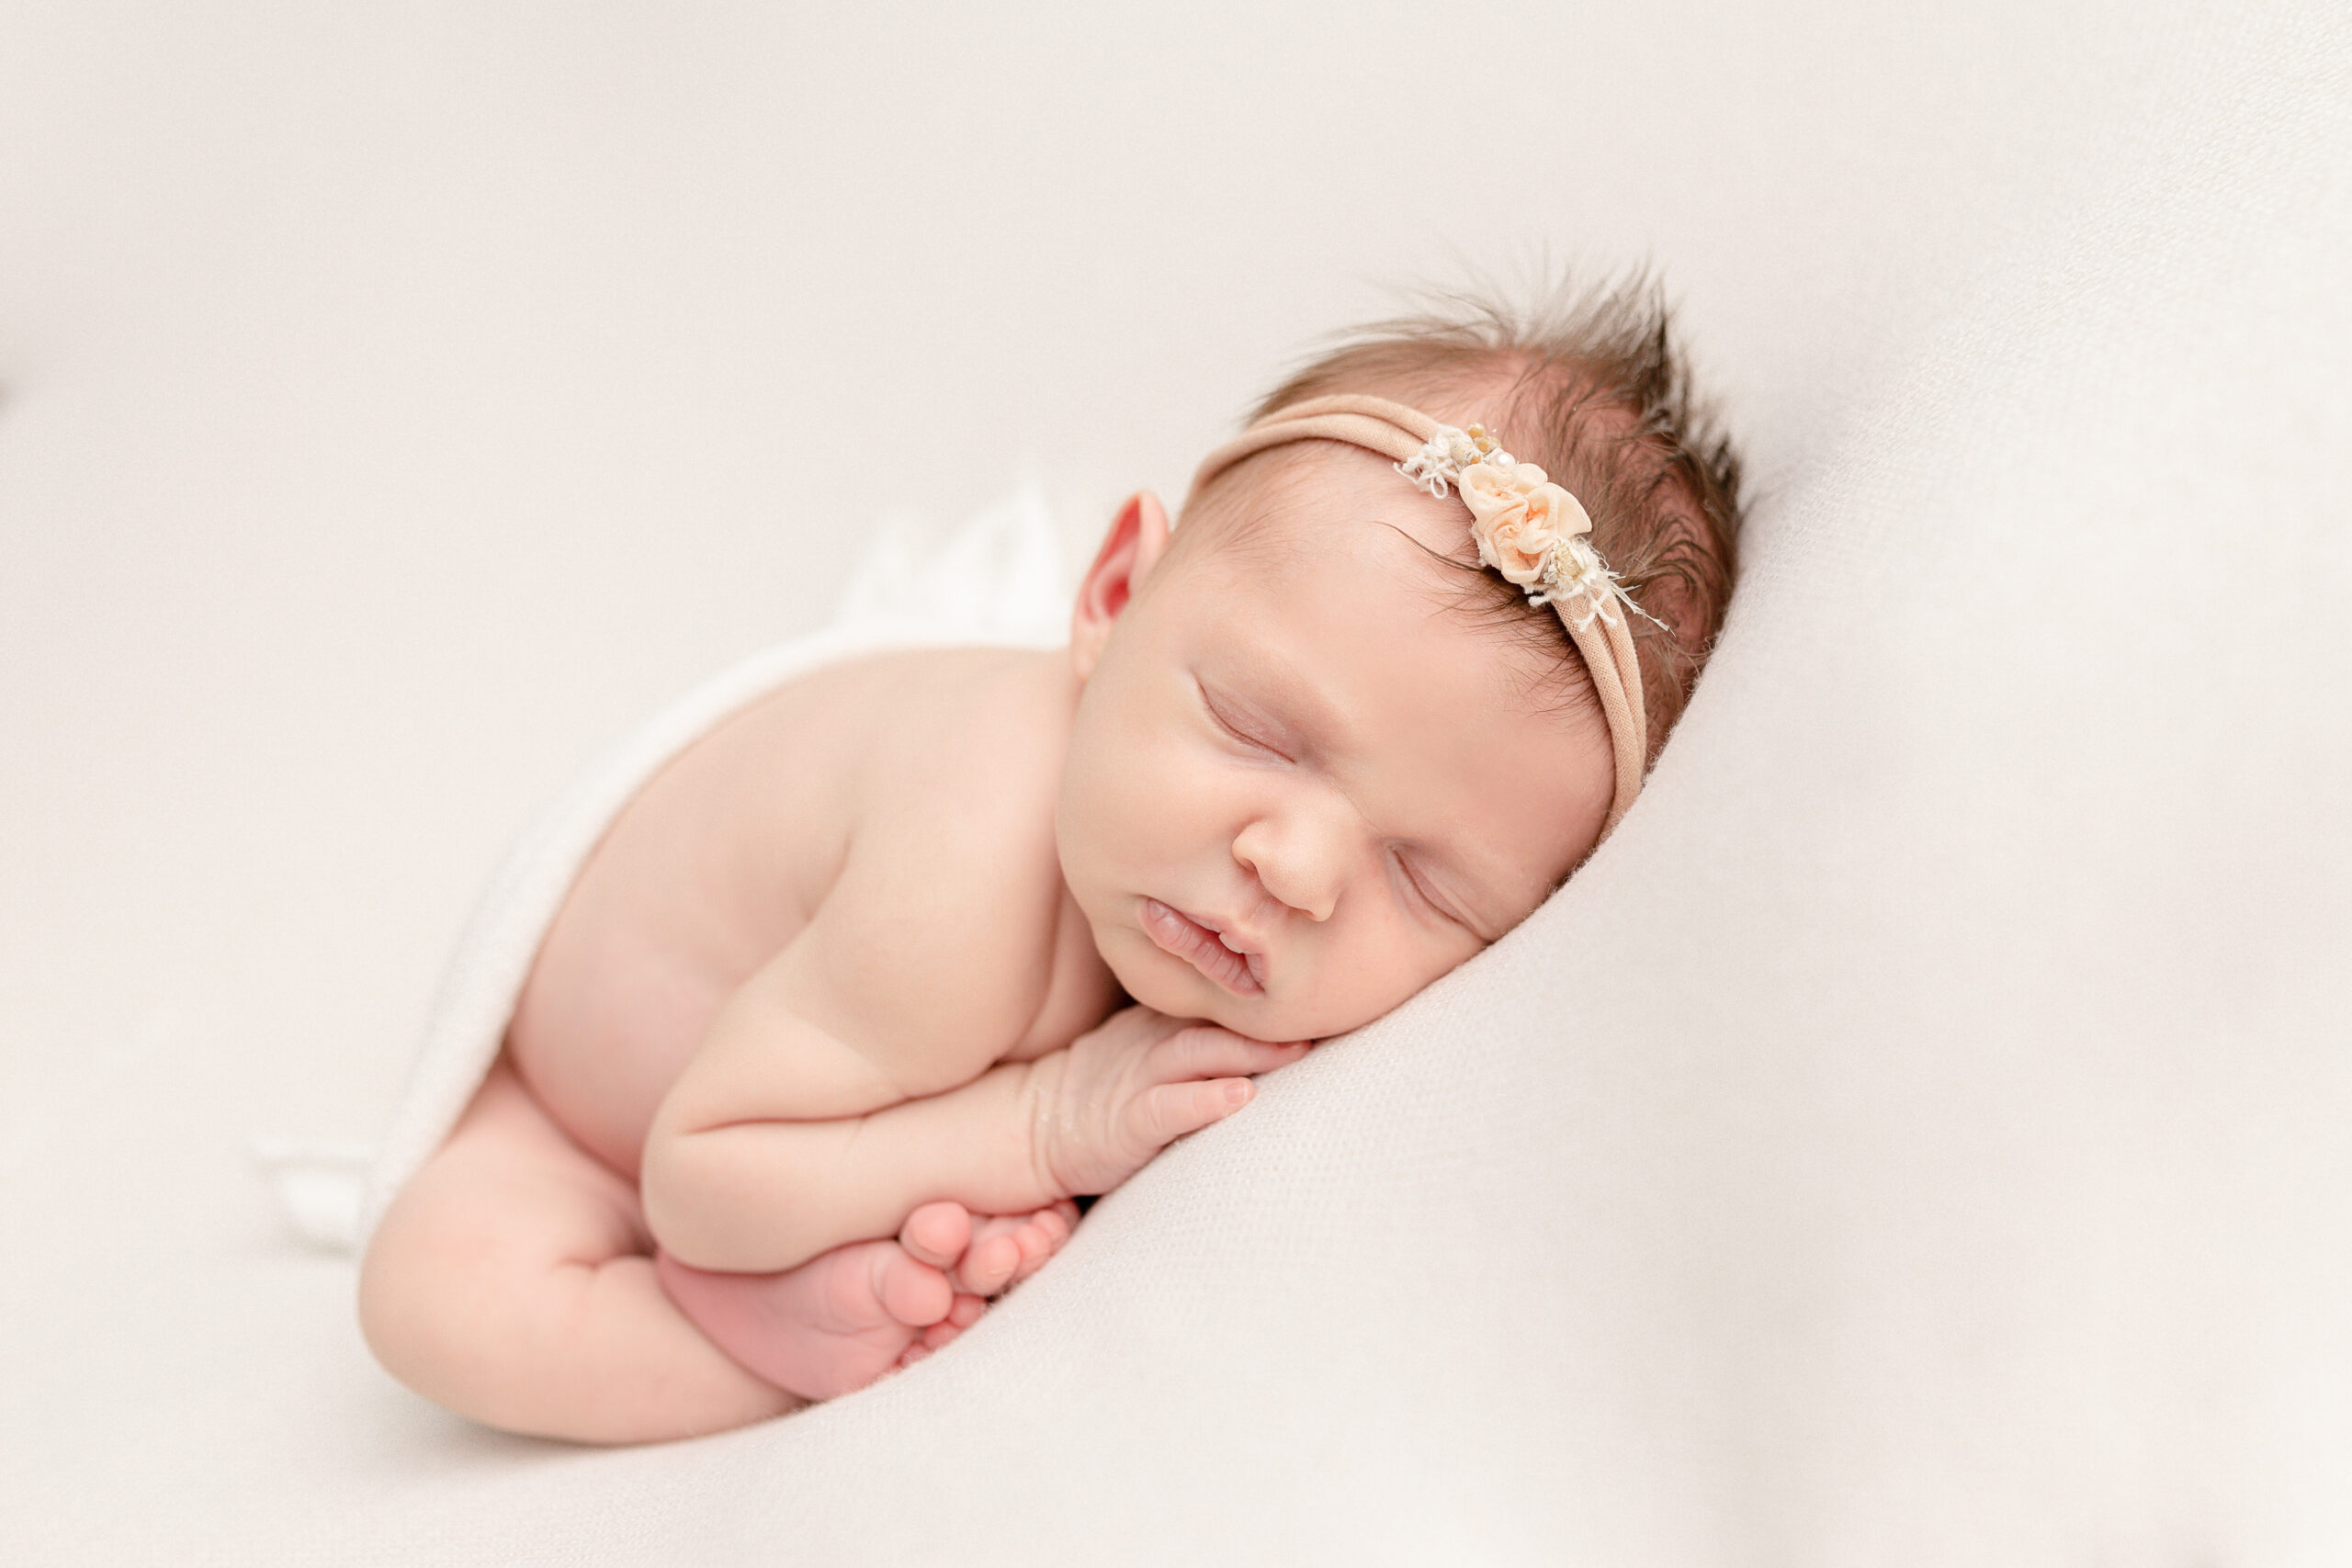 newborn baby girl with a white blanket and headband sleeping on her hands ABC Doula